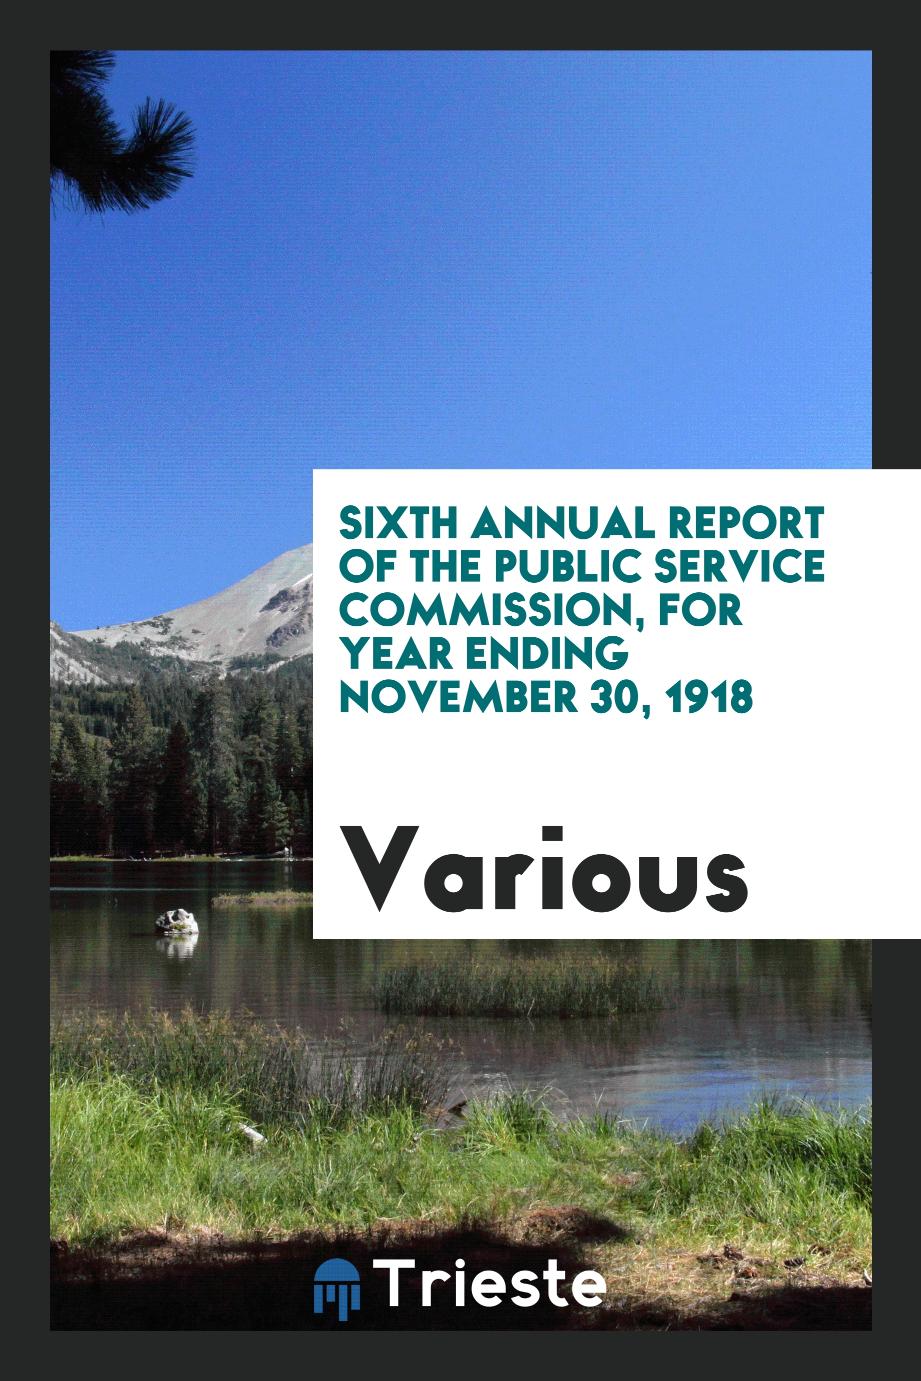 Sixth Annual Report of the Public Service Commission, for Year Ending November 30, 1918